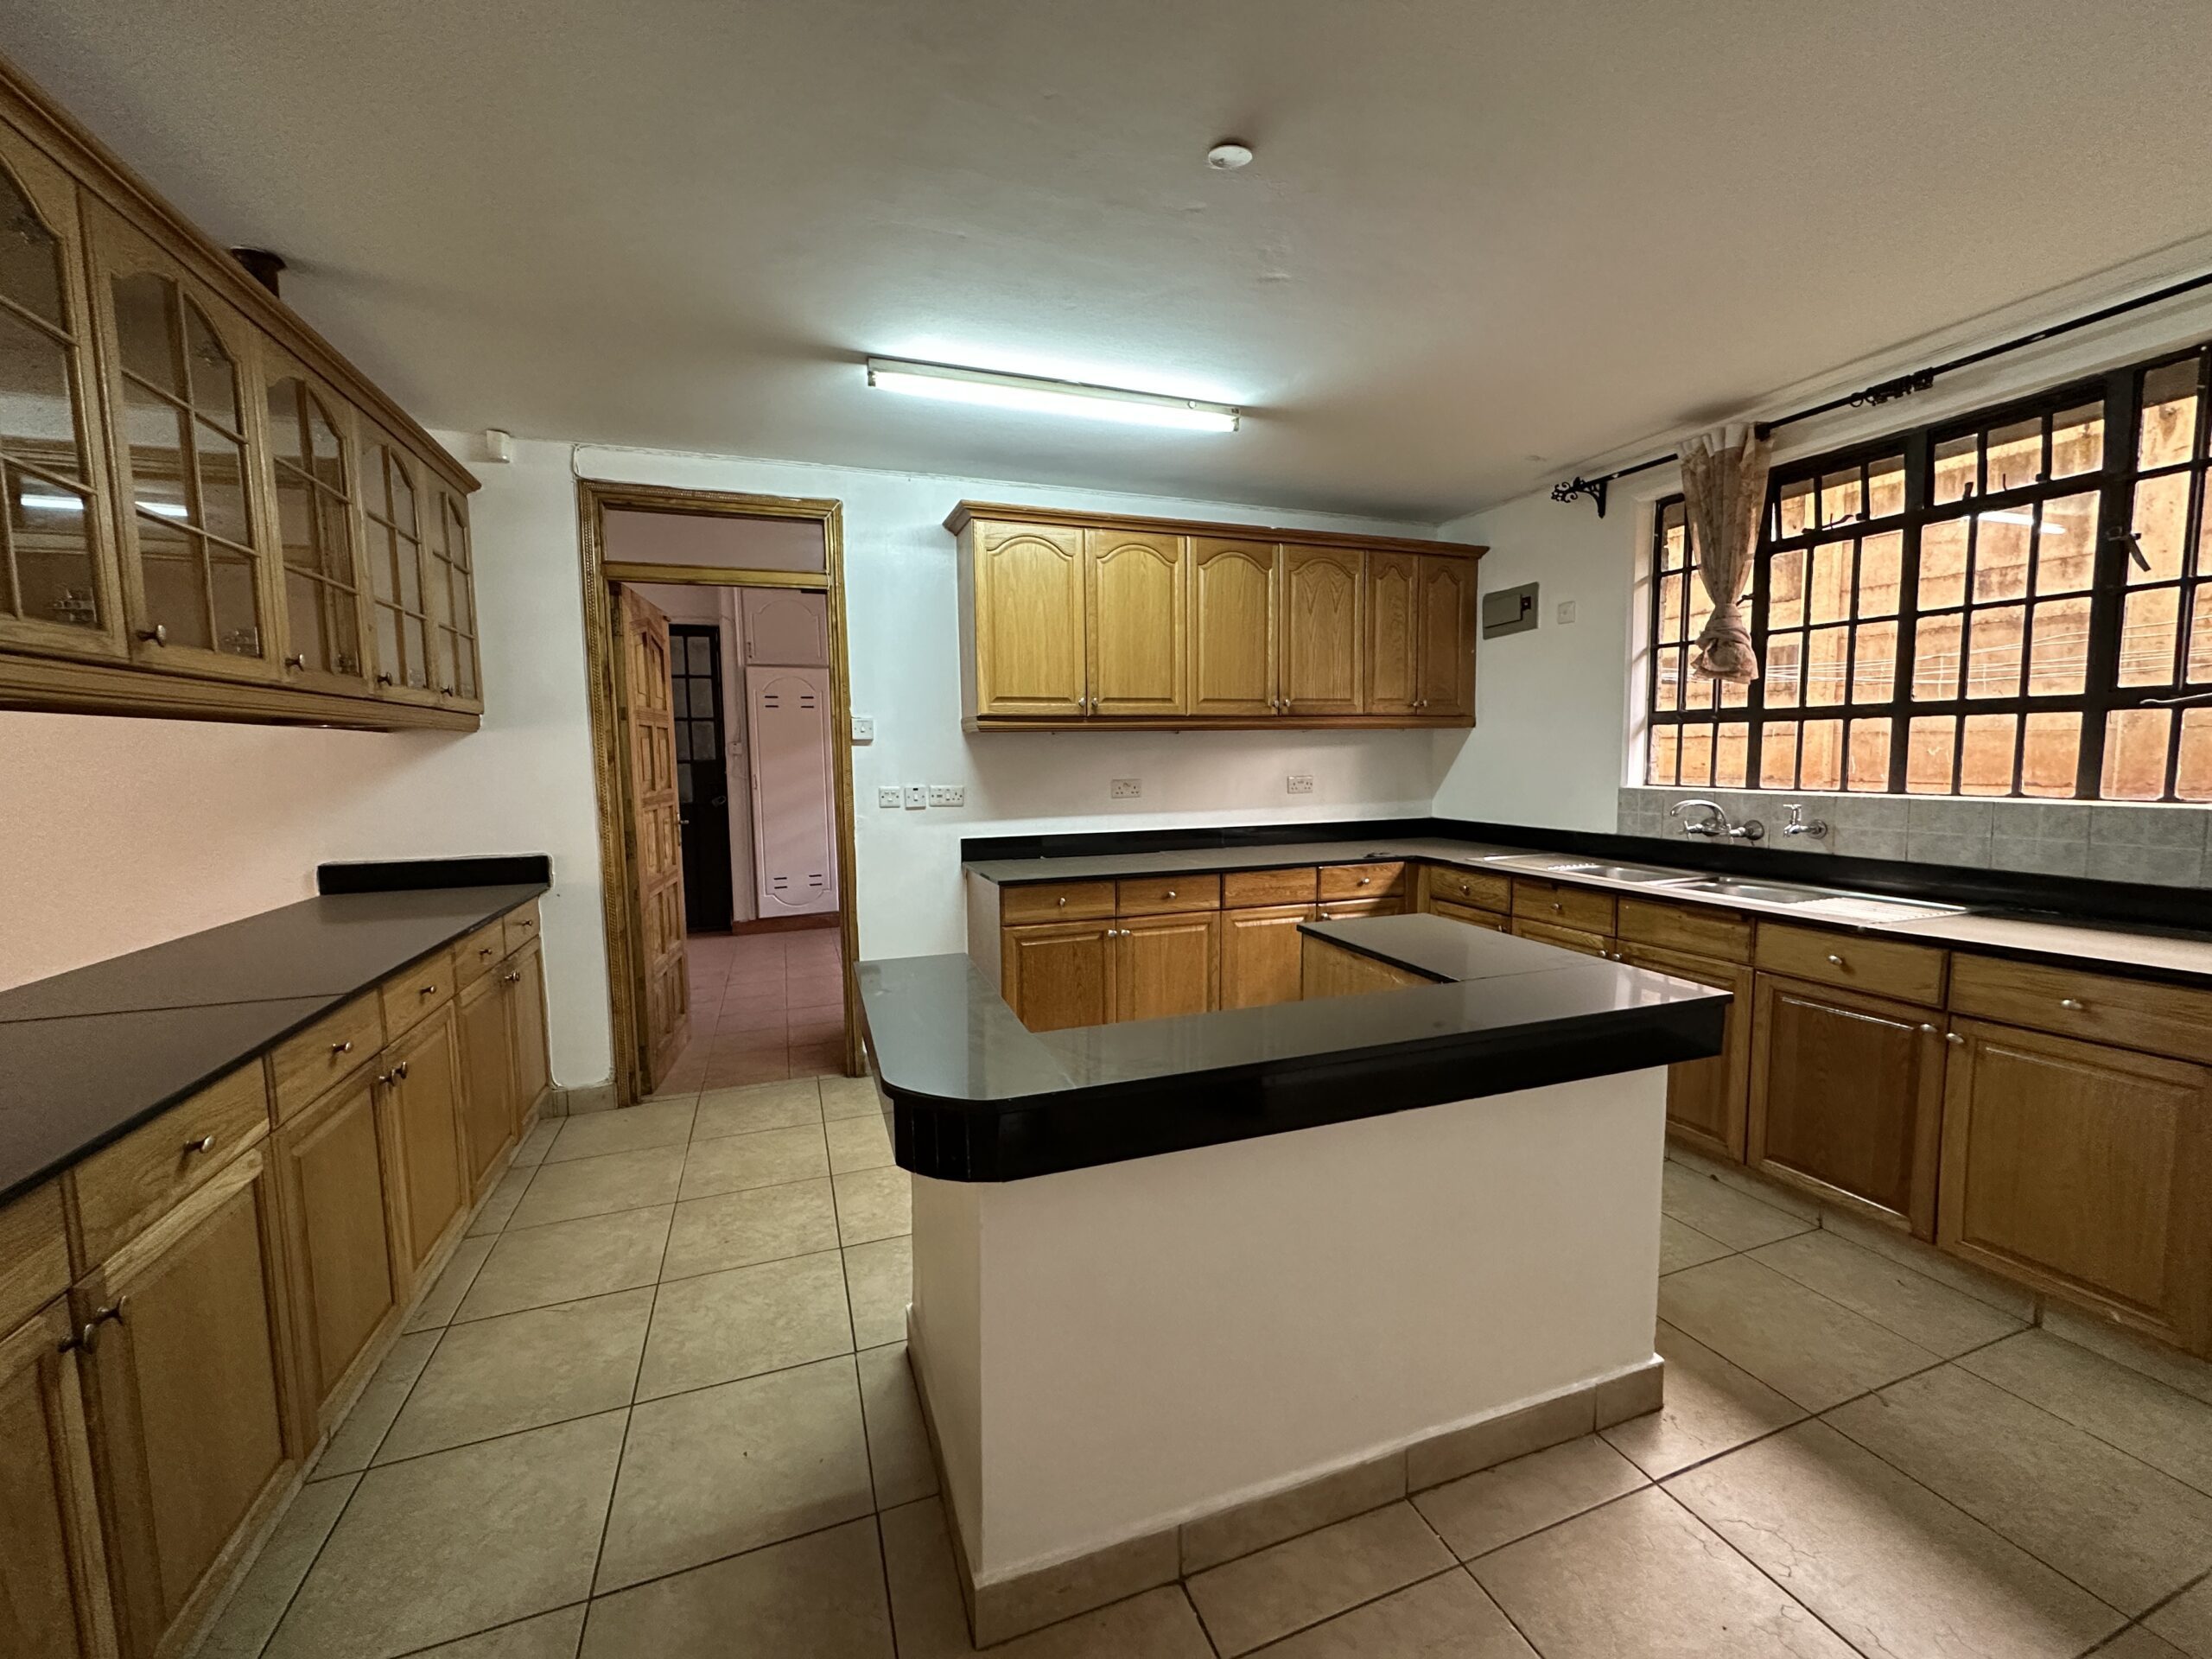 3 bedroom apartment for rent in Lavington with dsq